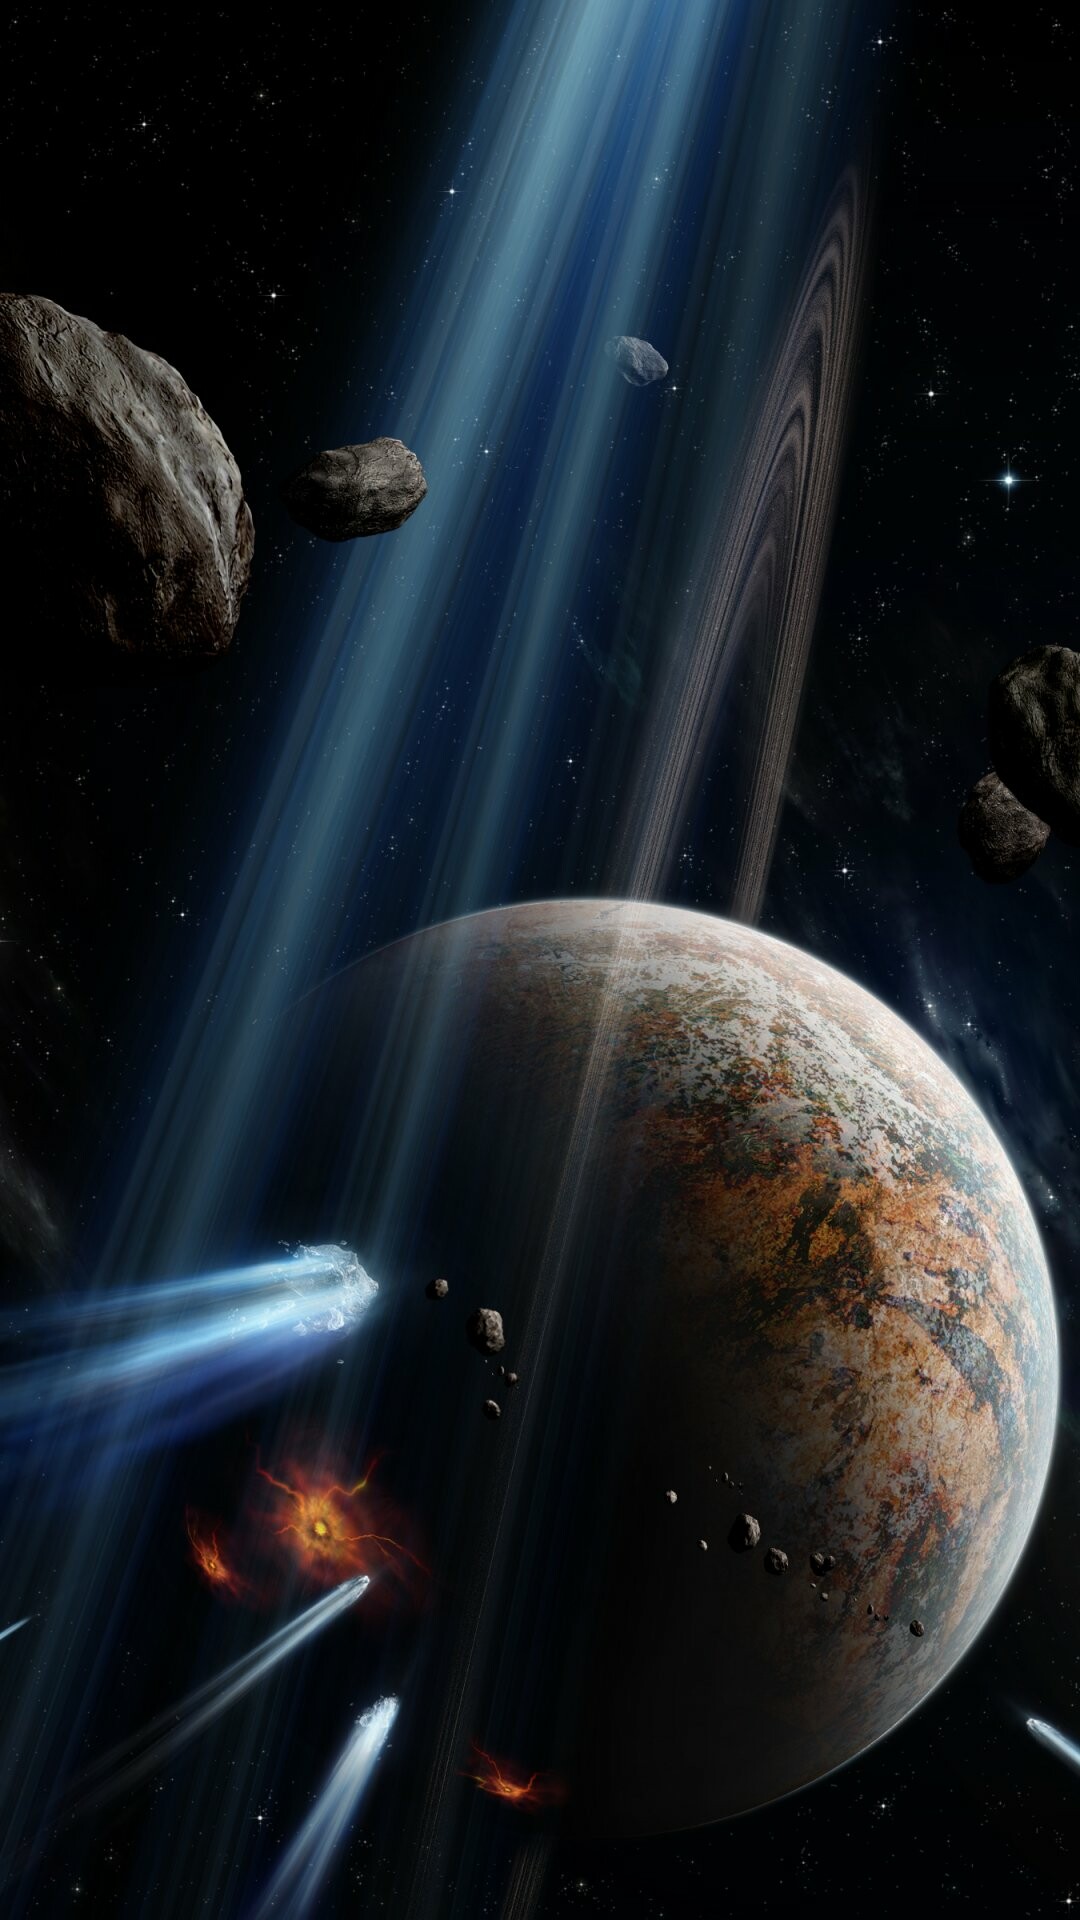 Meteor: Planets, Astronomical object, Comet and asteroid rock particles. 1080x1920 Full HD Wallpaper.